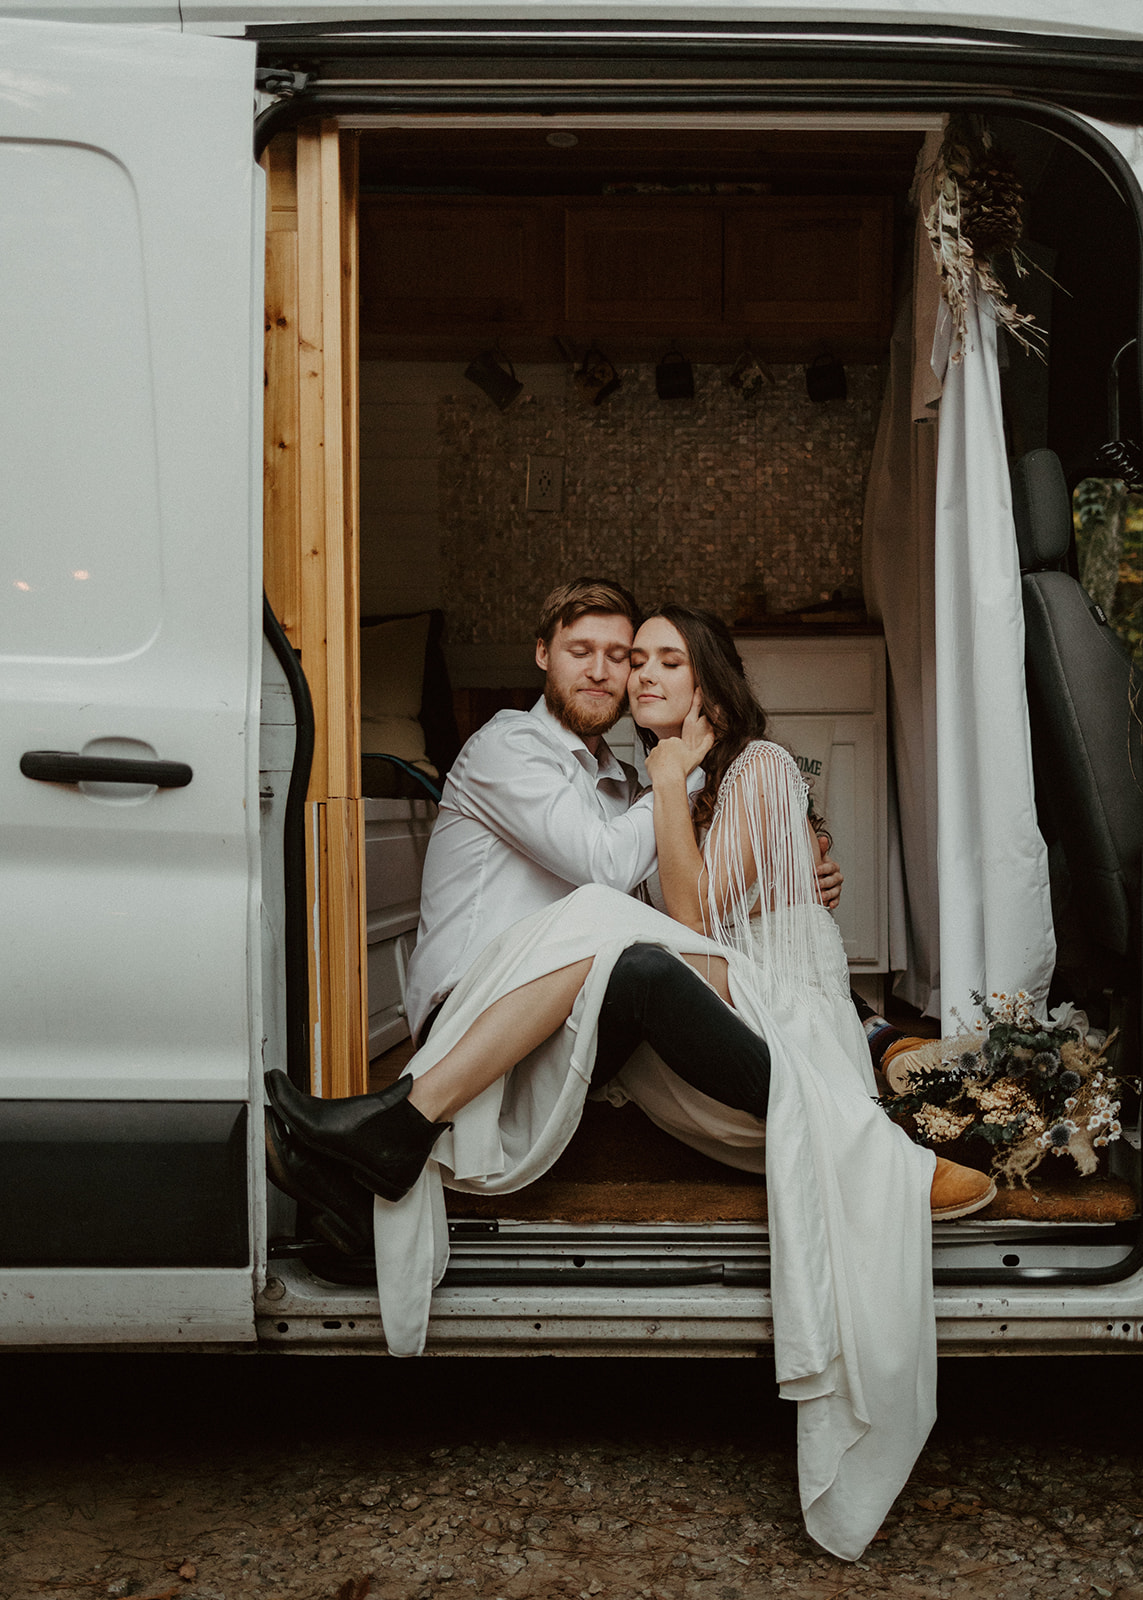 the couple sitting in their conversion van